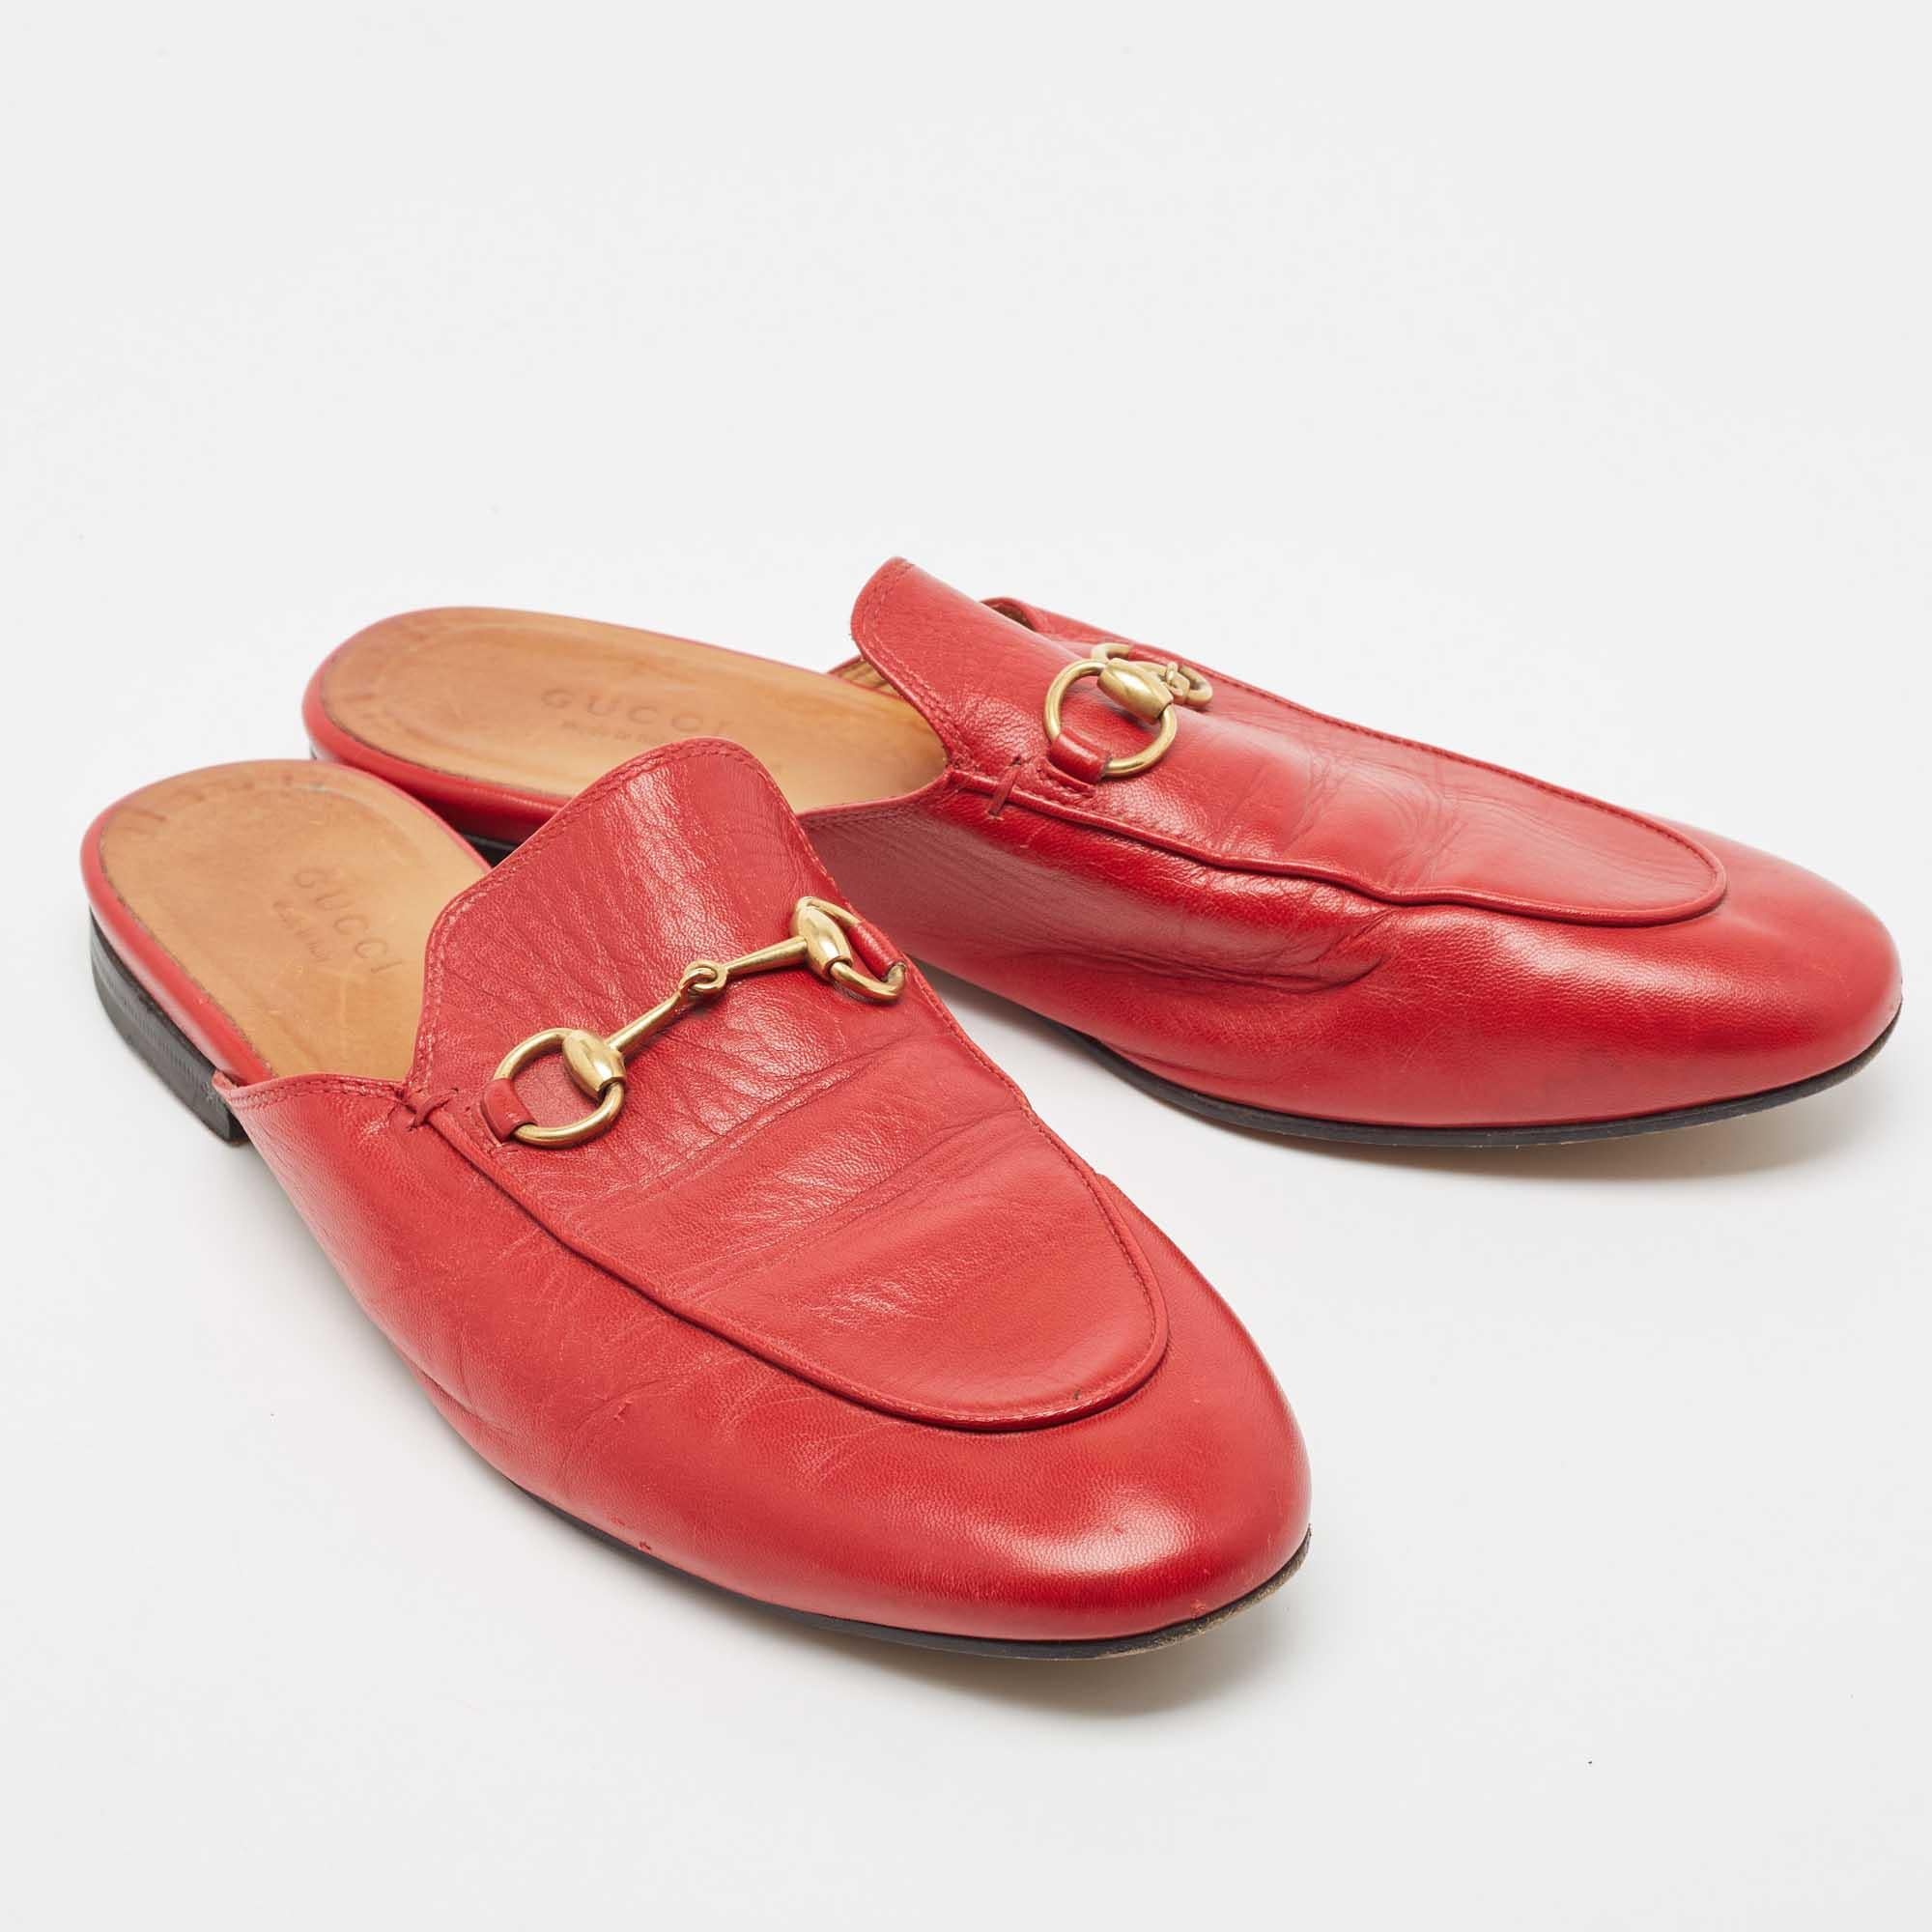 Women's Gucci Red Leather Princetown Flat Mules Size 38.5